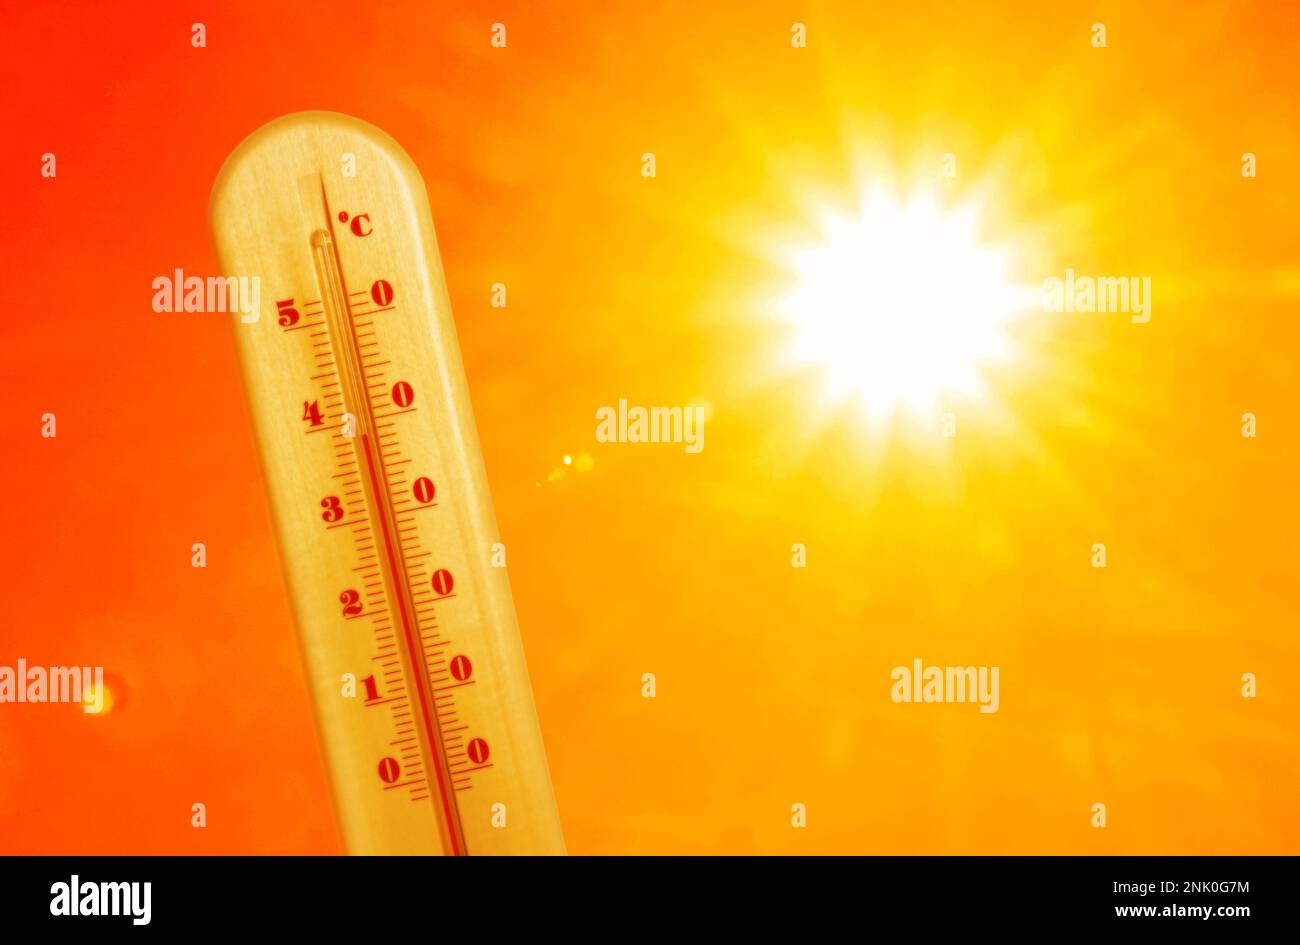 https://c8.alamy.com/comp/2NK0G7M/weather-thermometer-with-high-temperature-outdoors-on-hot-sunny-day-heat-stroke-warning-2NK0G7M.jpg